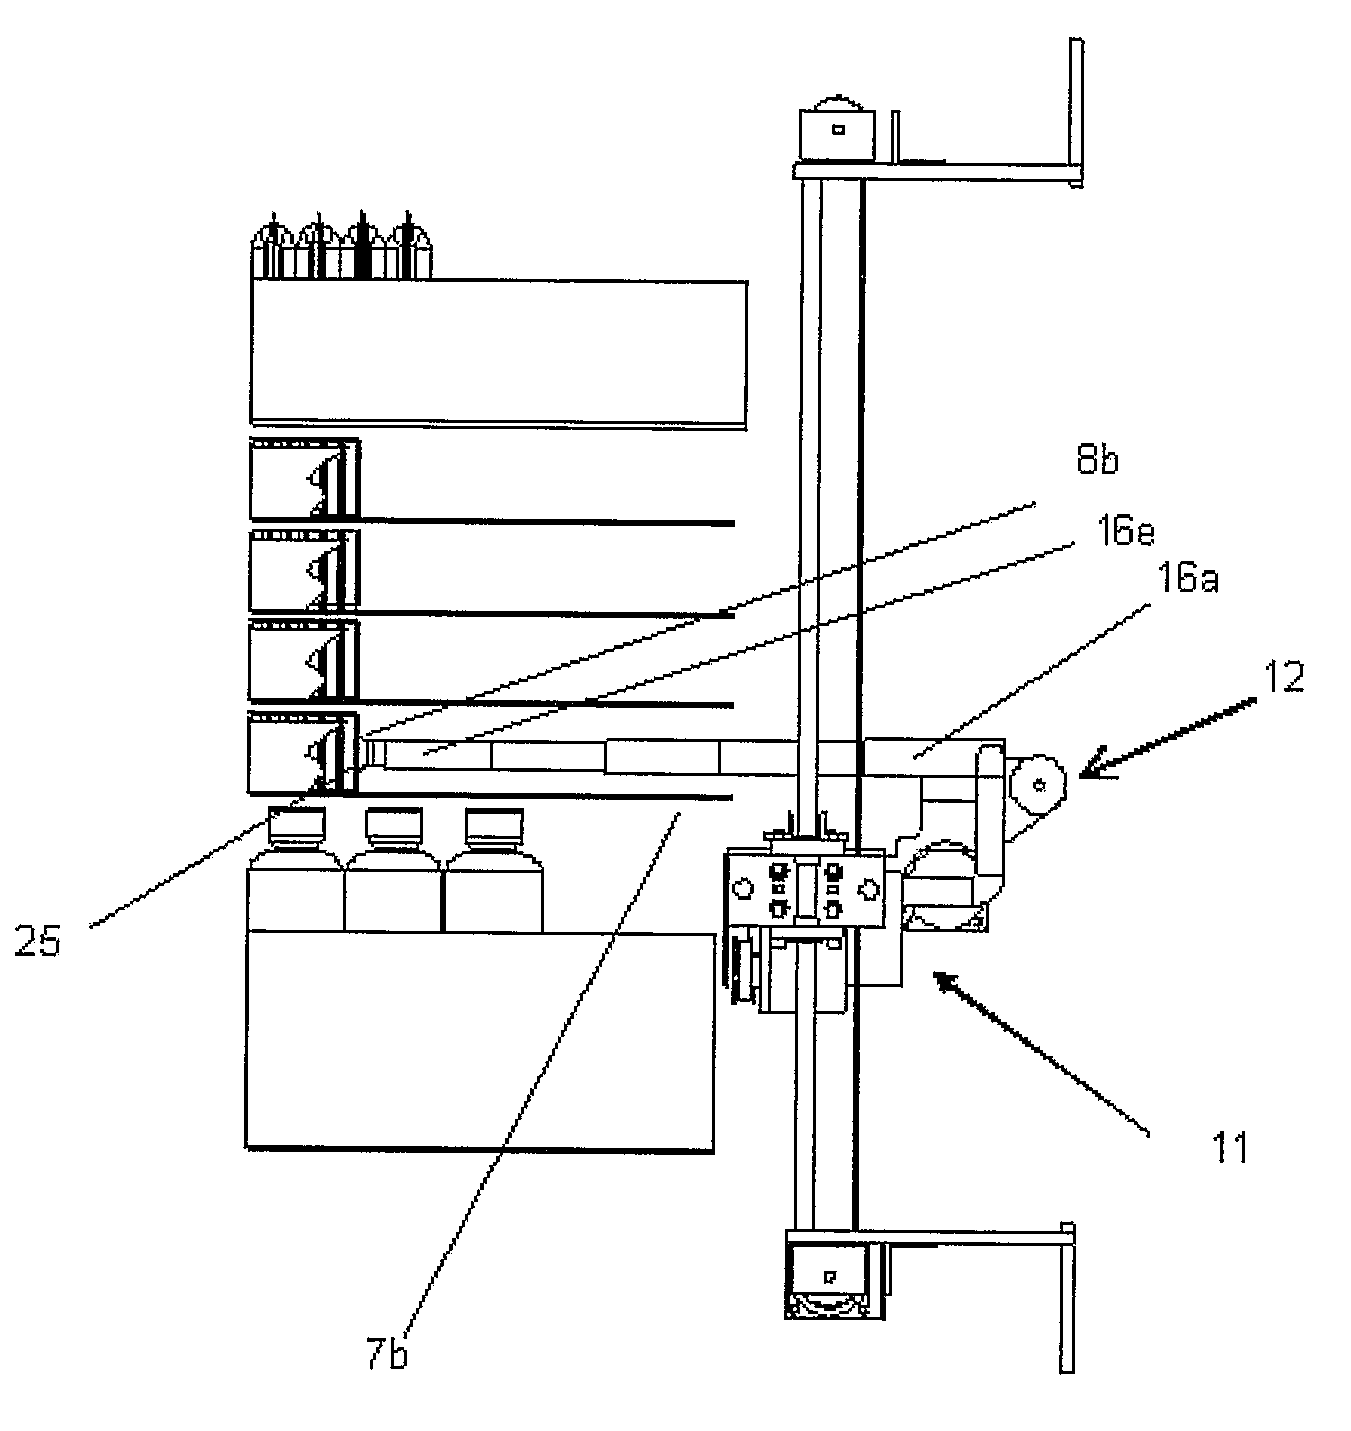 Article storage and retrieval apparatus, and vending machine